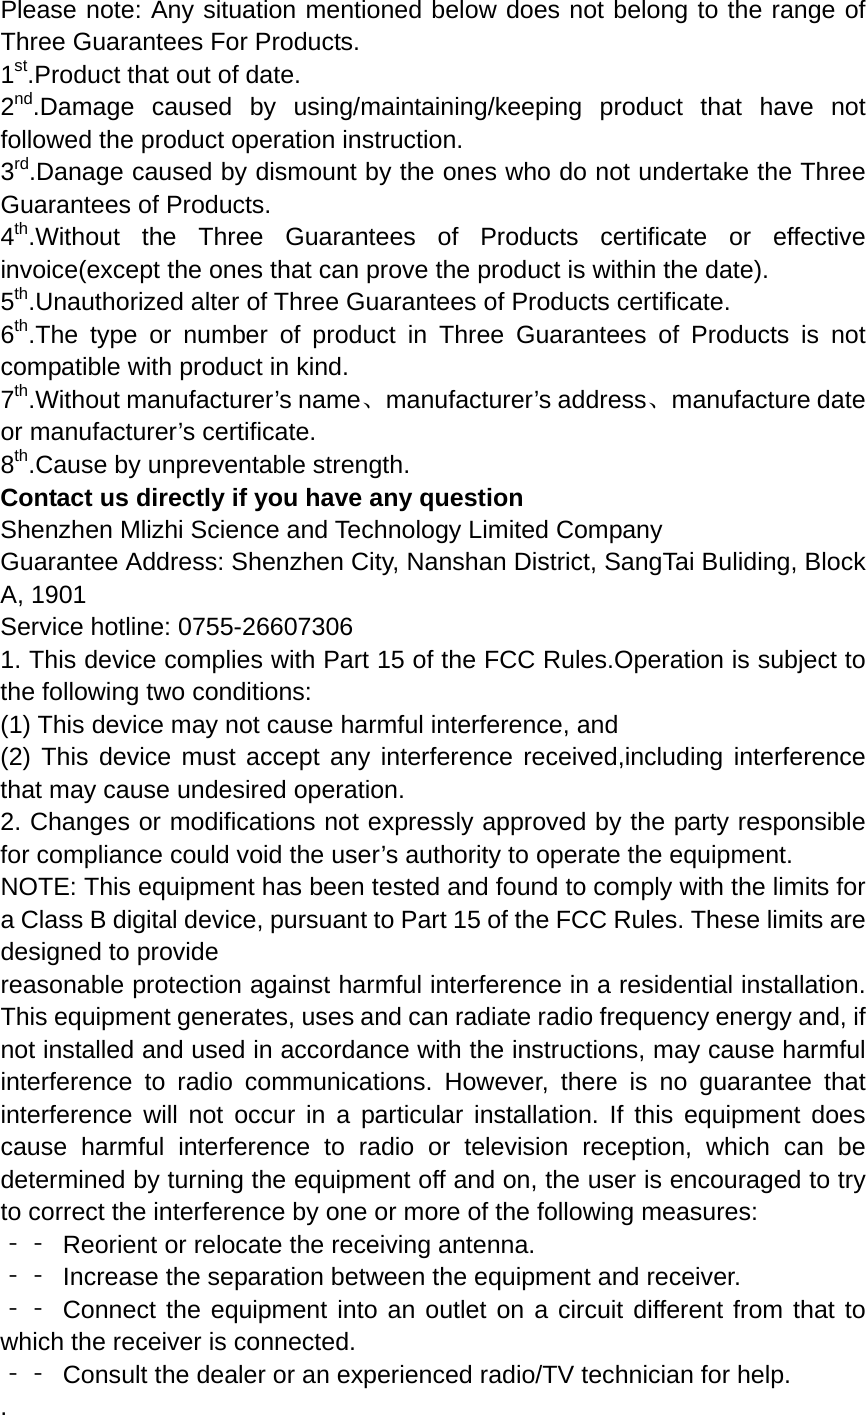 Please note: Any situation mentioned below does not belong to the range of Three Guarantees For Products. 1st.Product that out of date. 2nd.Damage caused by using/maintaining/keeping product that have not followed the product operation instruction. 3rd.Danage caused by dismount by the ones who do not undertake the Three Guarantees of Products. 4th.Without the Three Guarantees of Products certificate or effective invoice(except the ones that can prove the product is within the date). 5th.Unauthorized alter of Three Guarantees of Products certificate. 6th.The type or number of product in Three Guarantees of Products is not compatible with product in kind. 7th.Without manufacturer’s name、manufacturer’s address、manufacture date or manufacturer’s certificate. 8th.Cause by unpreventable strength. Contact us directly if you have any question Shenzhen Mlizhi Science and Technology Limited Company Guarantee Address: Shenzhen City, Nanshan District, SangTai Buliding, Block A, 1901 Service hotline: 0755-26607306 1. This device complies with Part 15 of the FCC Rules.Operation is subject to the following two conditions: (1) This device may not cause harmful interference, and (2) This device must accept any interference received,including interference that may cause undesired operation. 2. Changes or modifications not expressly approved by the party responsible for compliance could void the user’s authority to operate the equipment. NOTE: This equipment has been tested and found to comply with the limits for a Class B digital device, pursuant to Part 15 of the FCC Rules. These limits are designed to provide reasonable protection against harmful interference in a residential installation. This equipment generates, uses and can radiate radio frequency energy and, if not installed and used in accordance with the instructions, may cause harmful interference to radio communications. However, there is no guarantee that interference will not occur in a particular installation. If this equipment does cause harmful interference to radio or television reception, which can be determined by turning the equipment off and on, the user is encouraged to try to correct the interference by one or more of the following measures: ‐‐ Reorient or relocate the receiving antenna. ‐‐ Increase the separation between the equipment and receiver. ‐‐ Connect the equipment into an outlet on a circuit different from that to which the receiver is connected. ‐‐ Consult the dealer or an experienced radio/TV technician for help. . 